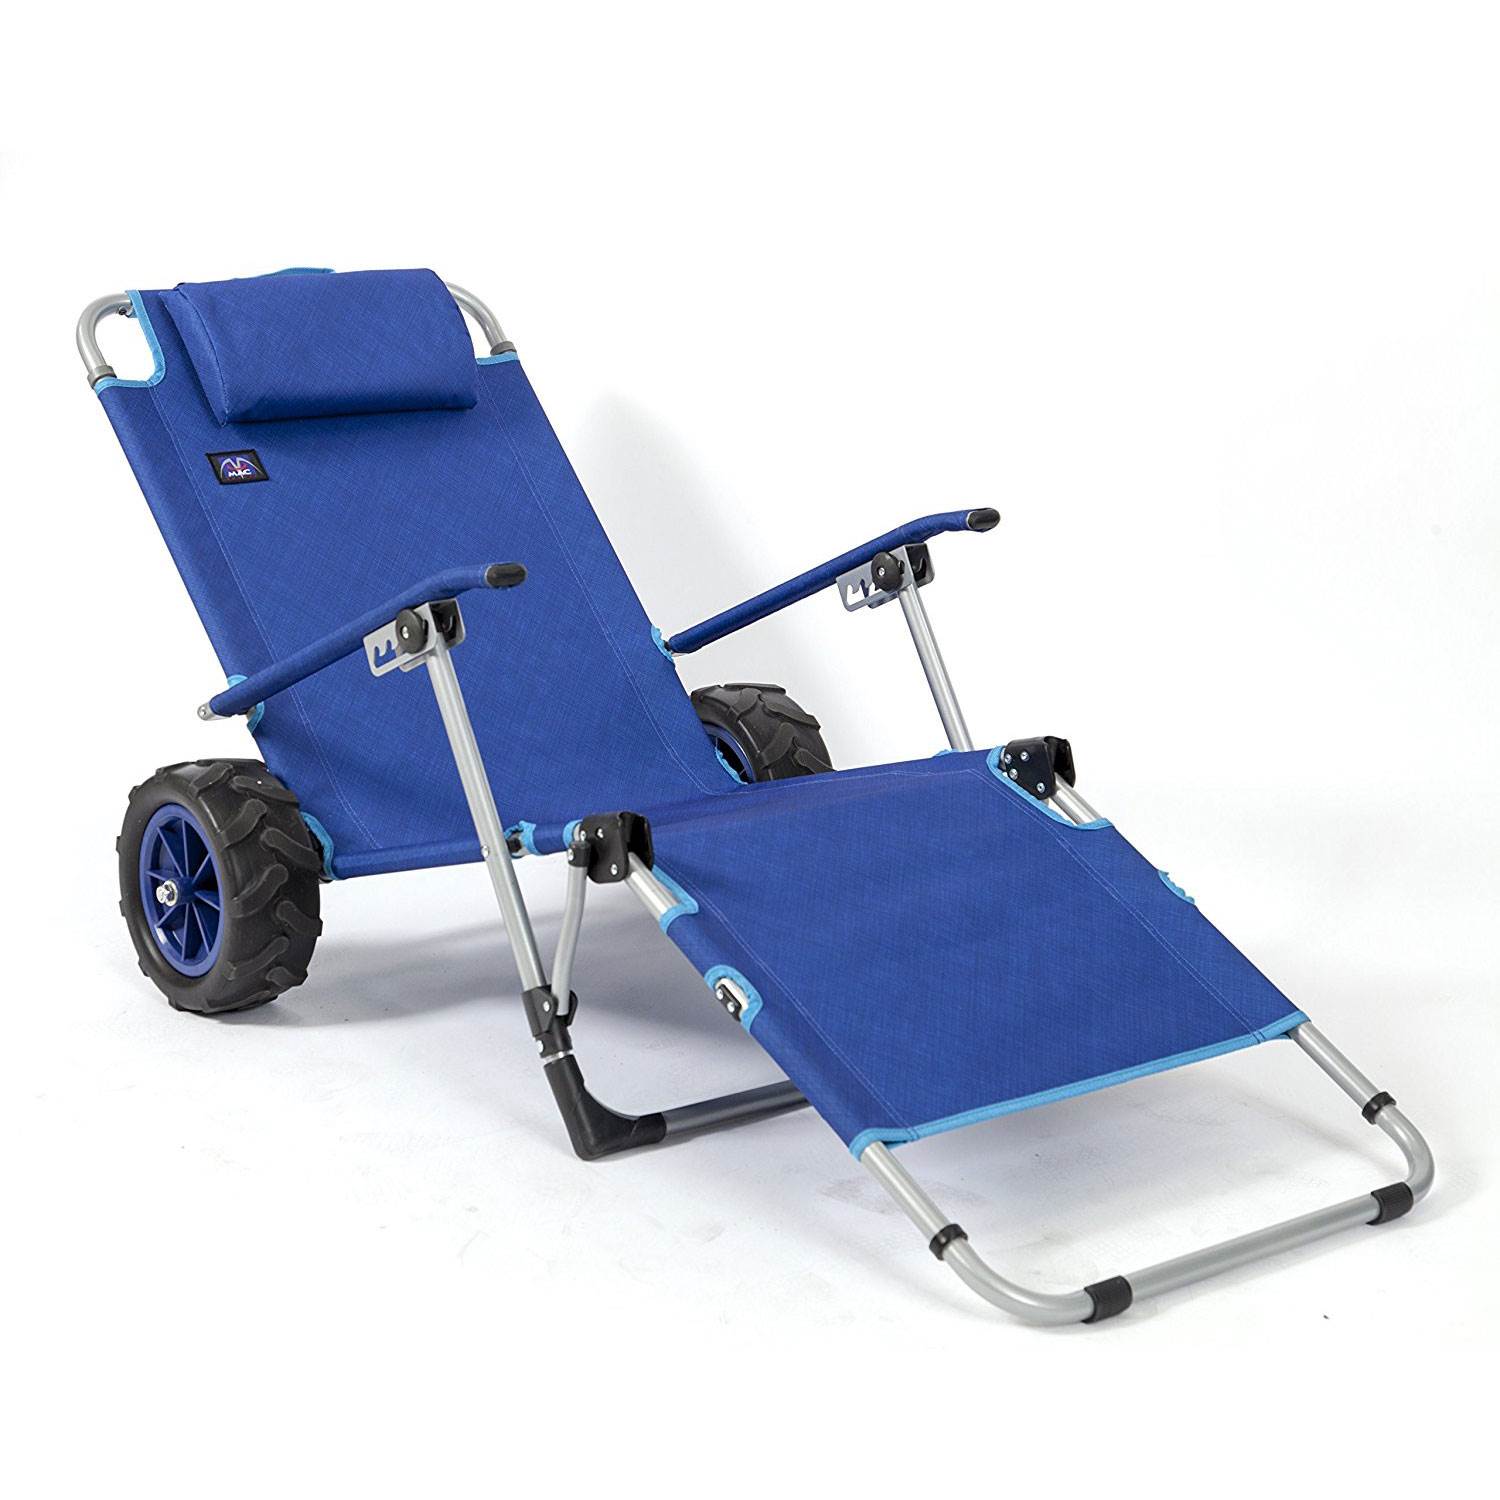 Mac Sports Beach Day Foldable Chaise Lounge Chair & Integrated Pull Cart Combo - image 3 of 5